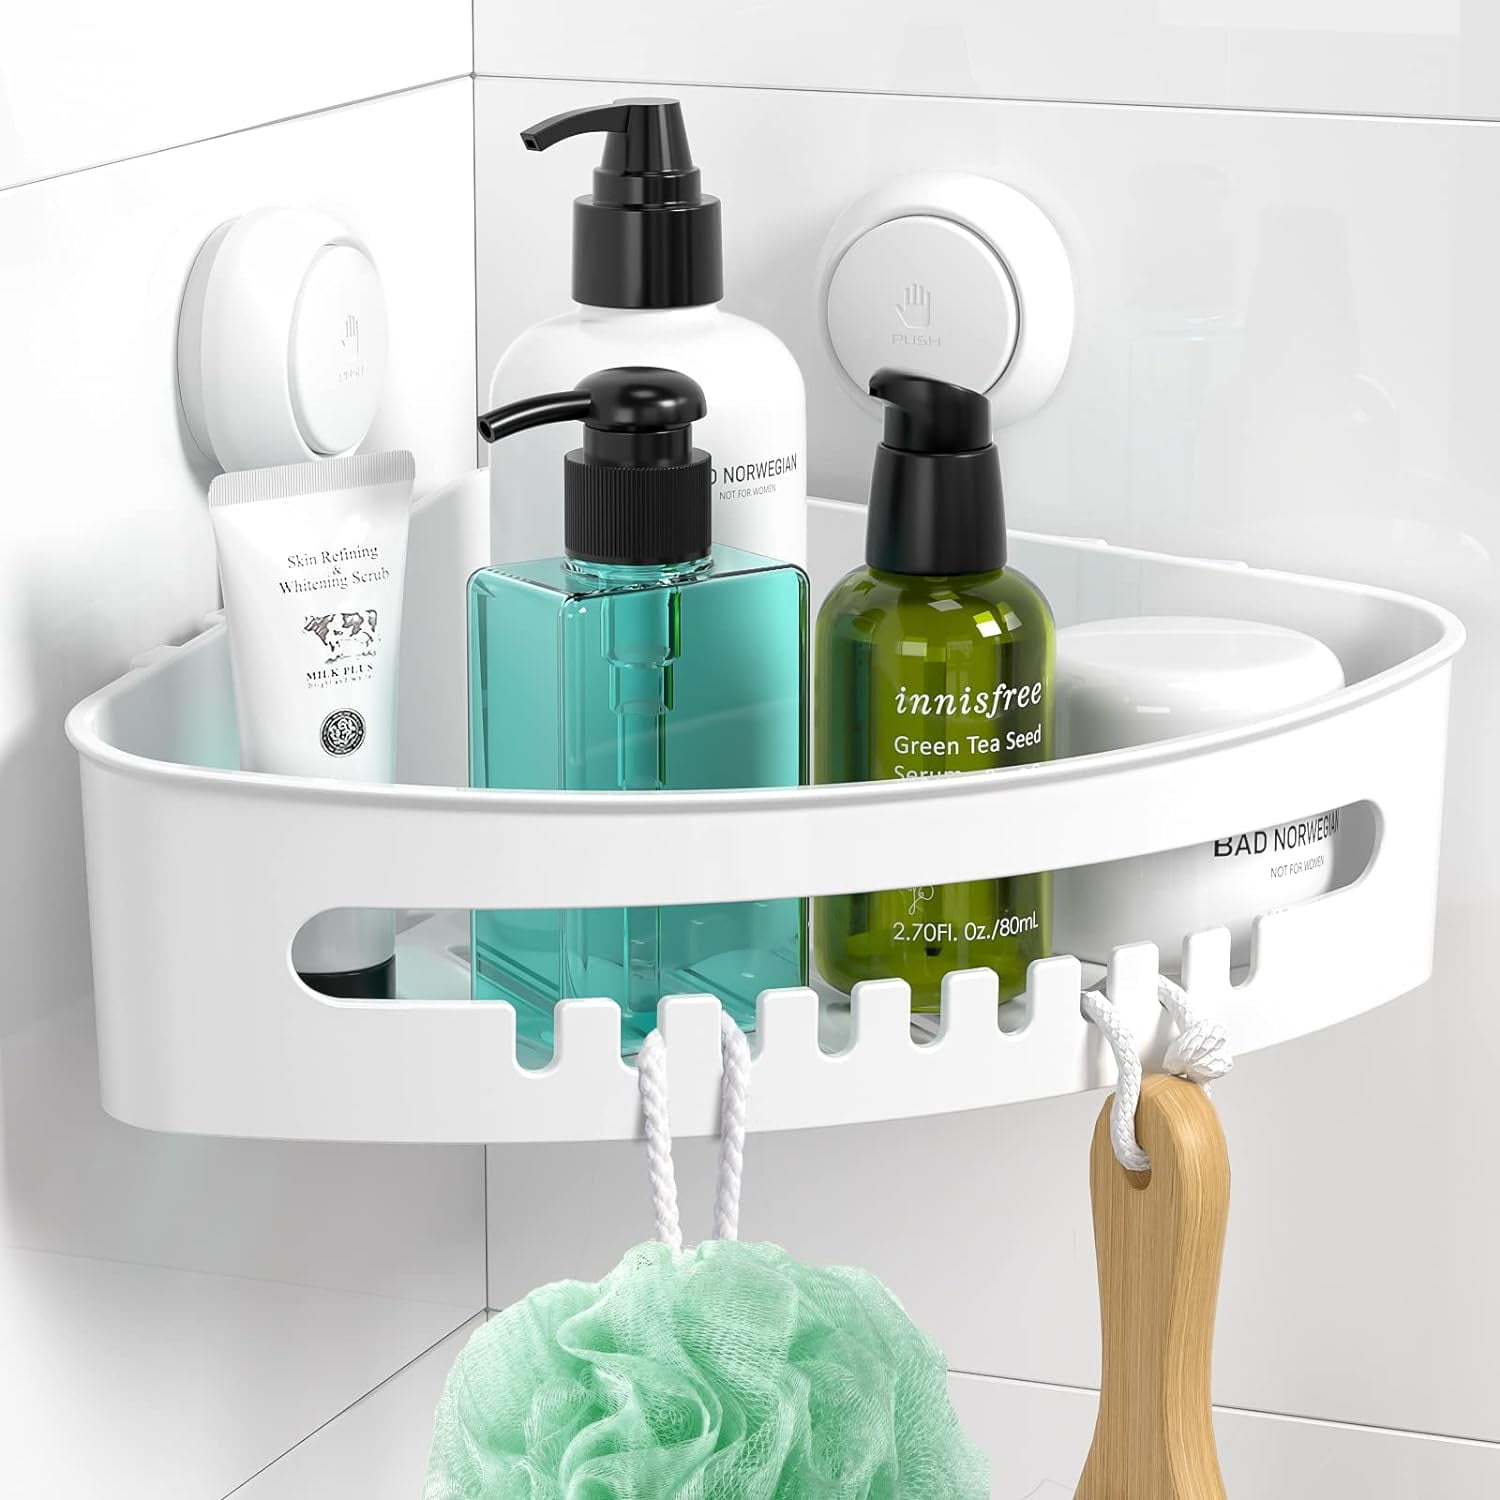 Luxear Corner Shower Caddy Vacuum Suction Cup Shower Organizer No-Drilling Removable Shower Shelf with Hooks Wall Mounted Corner Shower Storage Basket